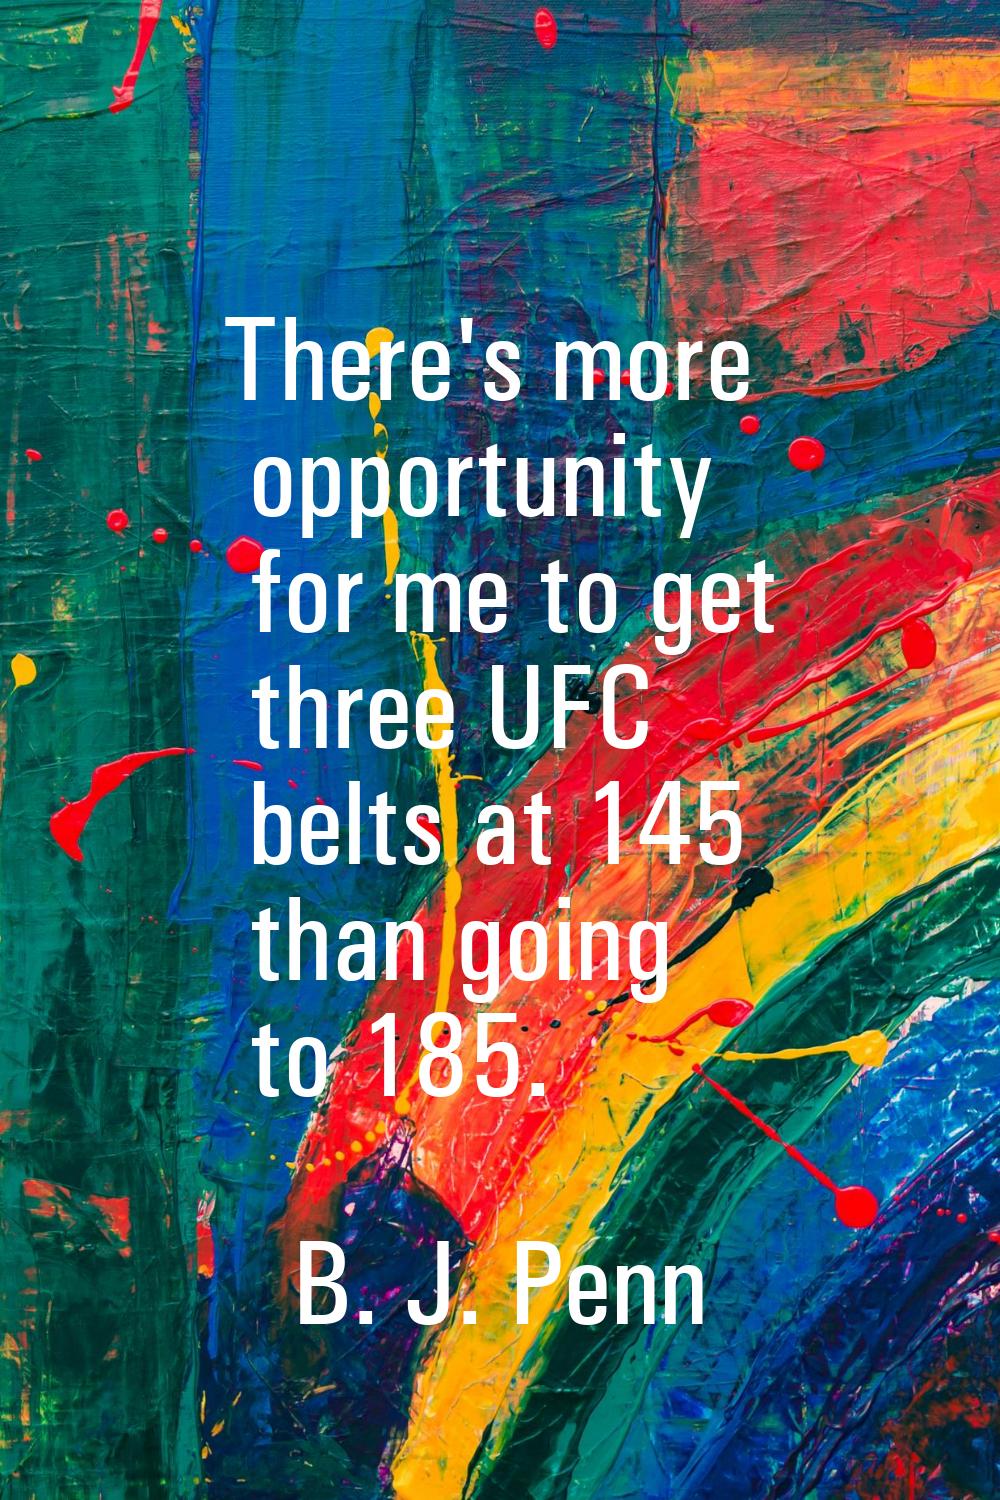 There's more opportunity for me to get three UFC belts at 145 than going to 185.